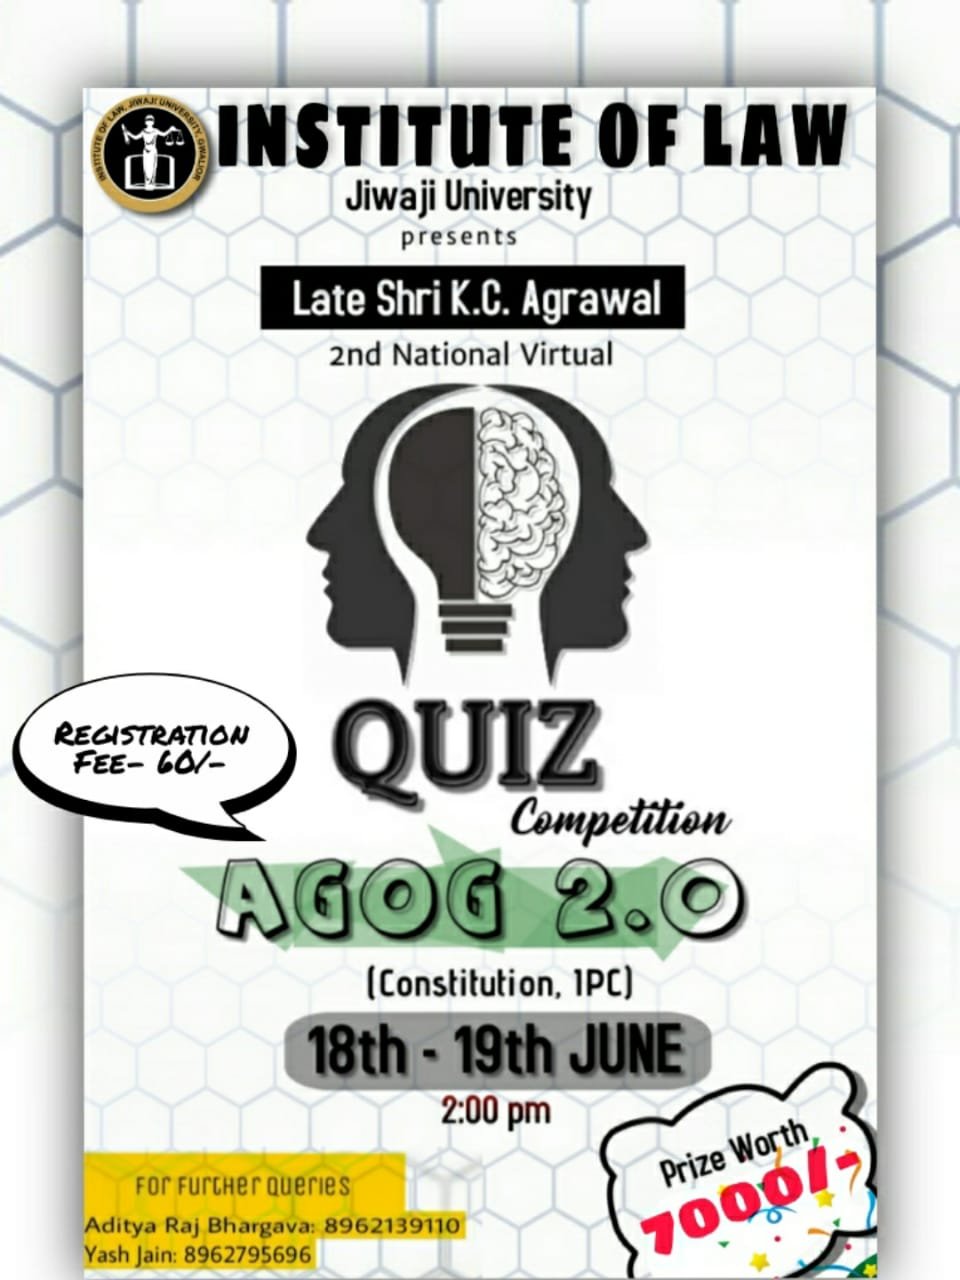 AGOG-2021 2nd National Virtual Law Quiz Competition Institute of Law Jiwaji University